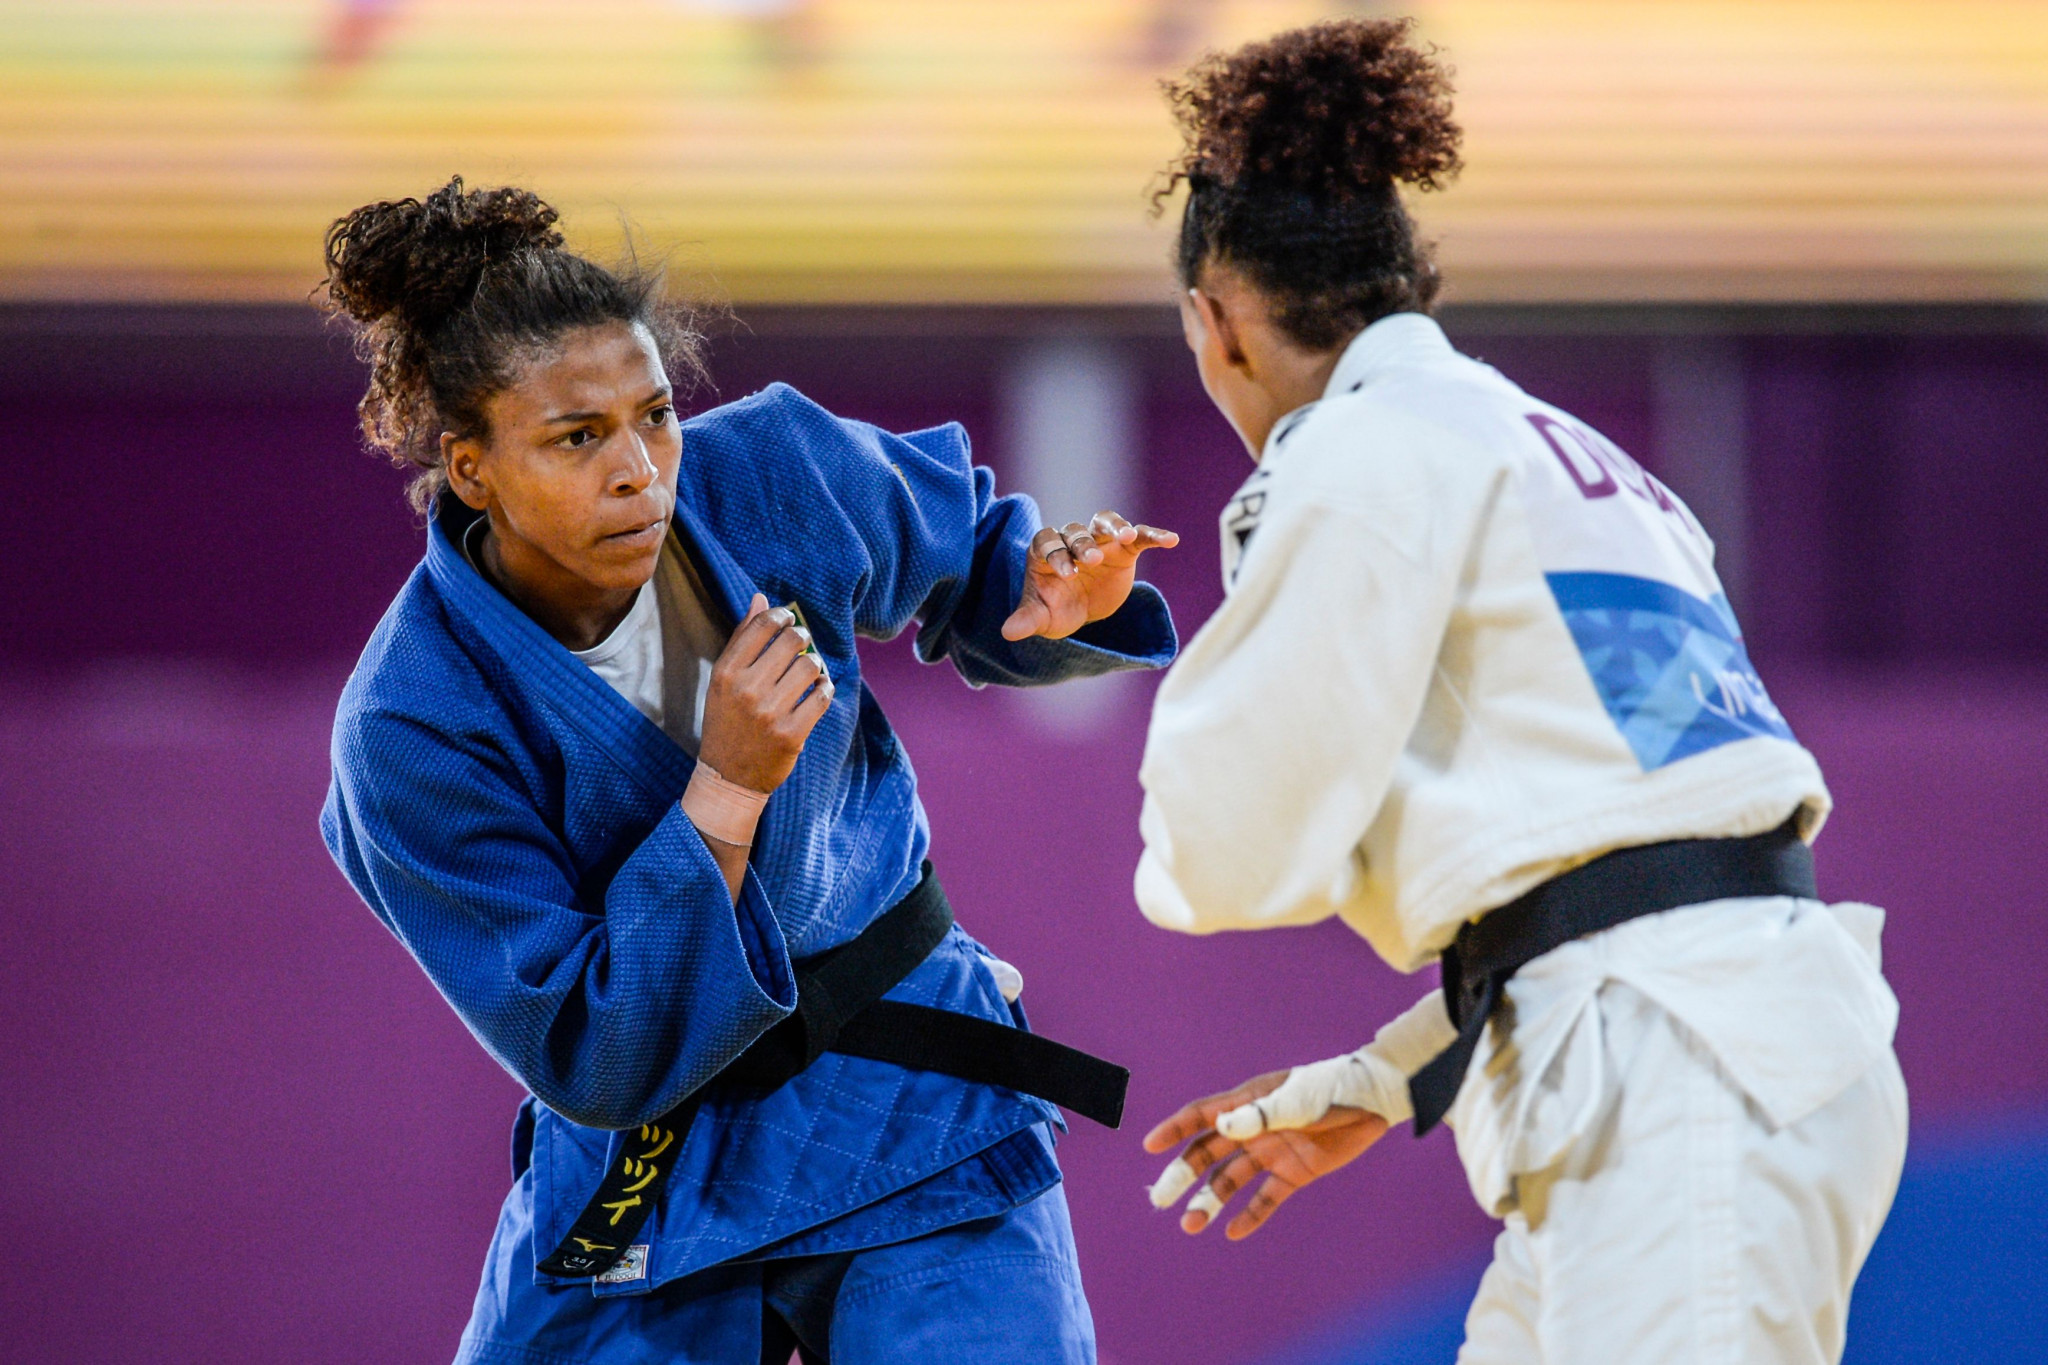 Olympic judo gold medallist Rafaela Silva says she has the 2020 Games in mind ahead of the World Championships in Tokyo ©Getty Images